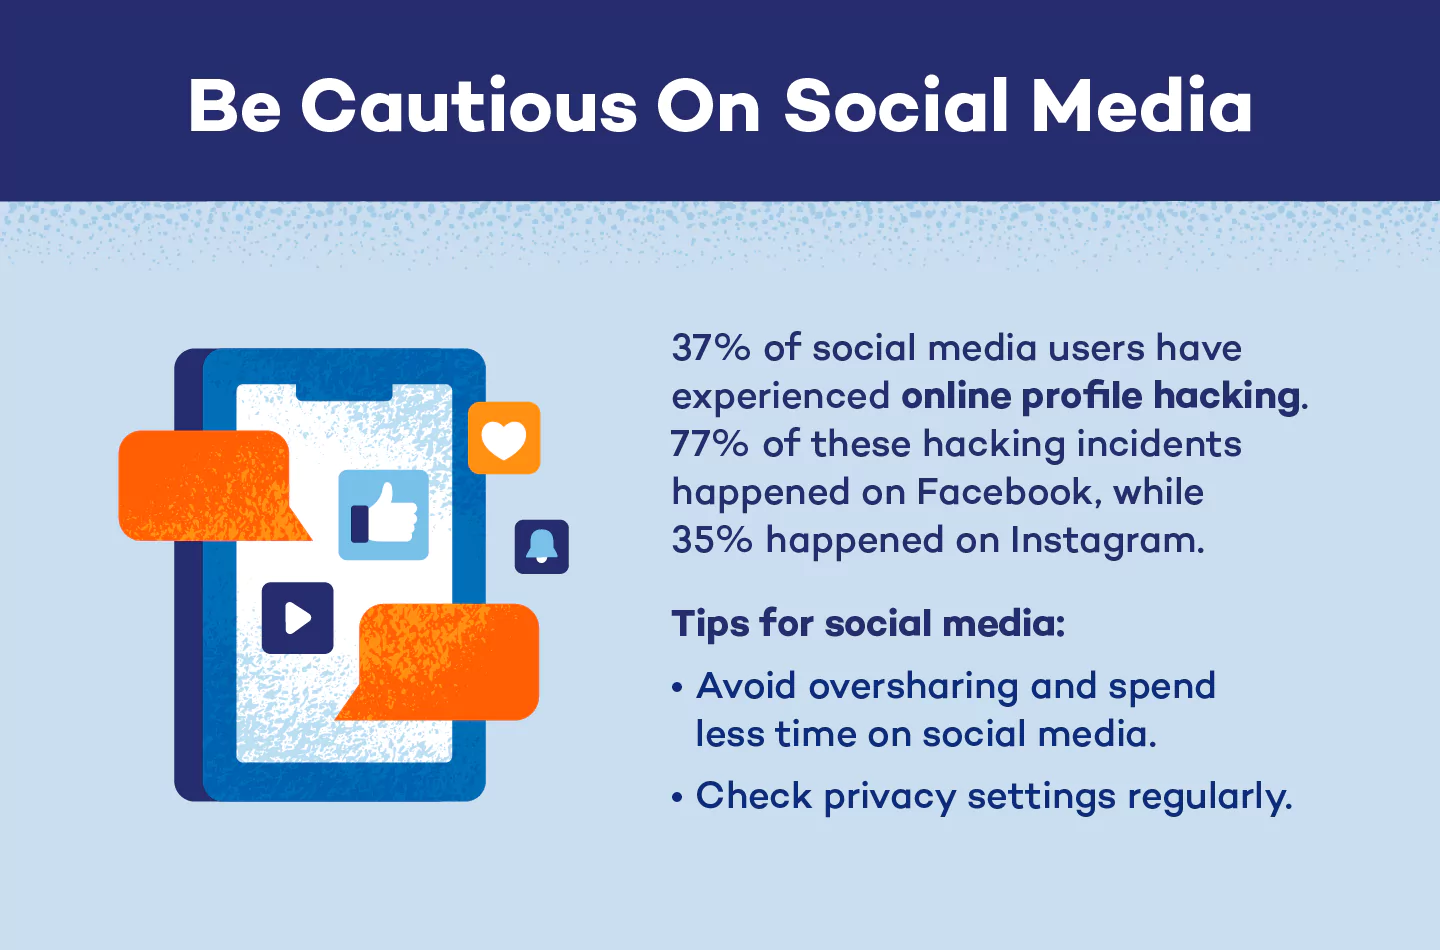 Illustration depicting dangers and privacy tips for social media.